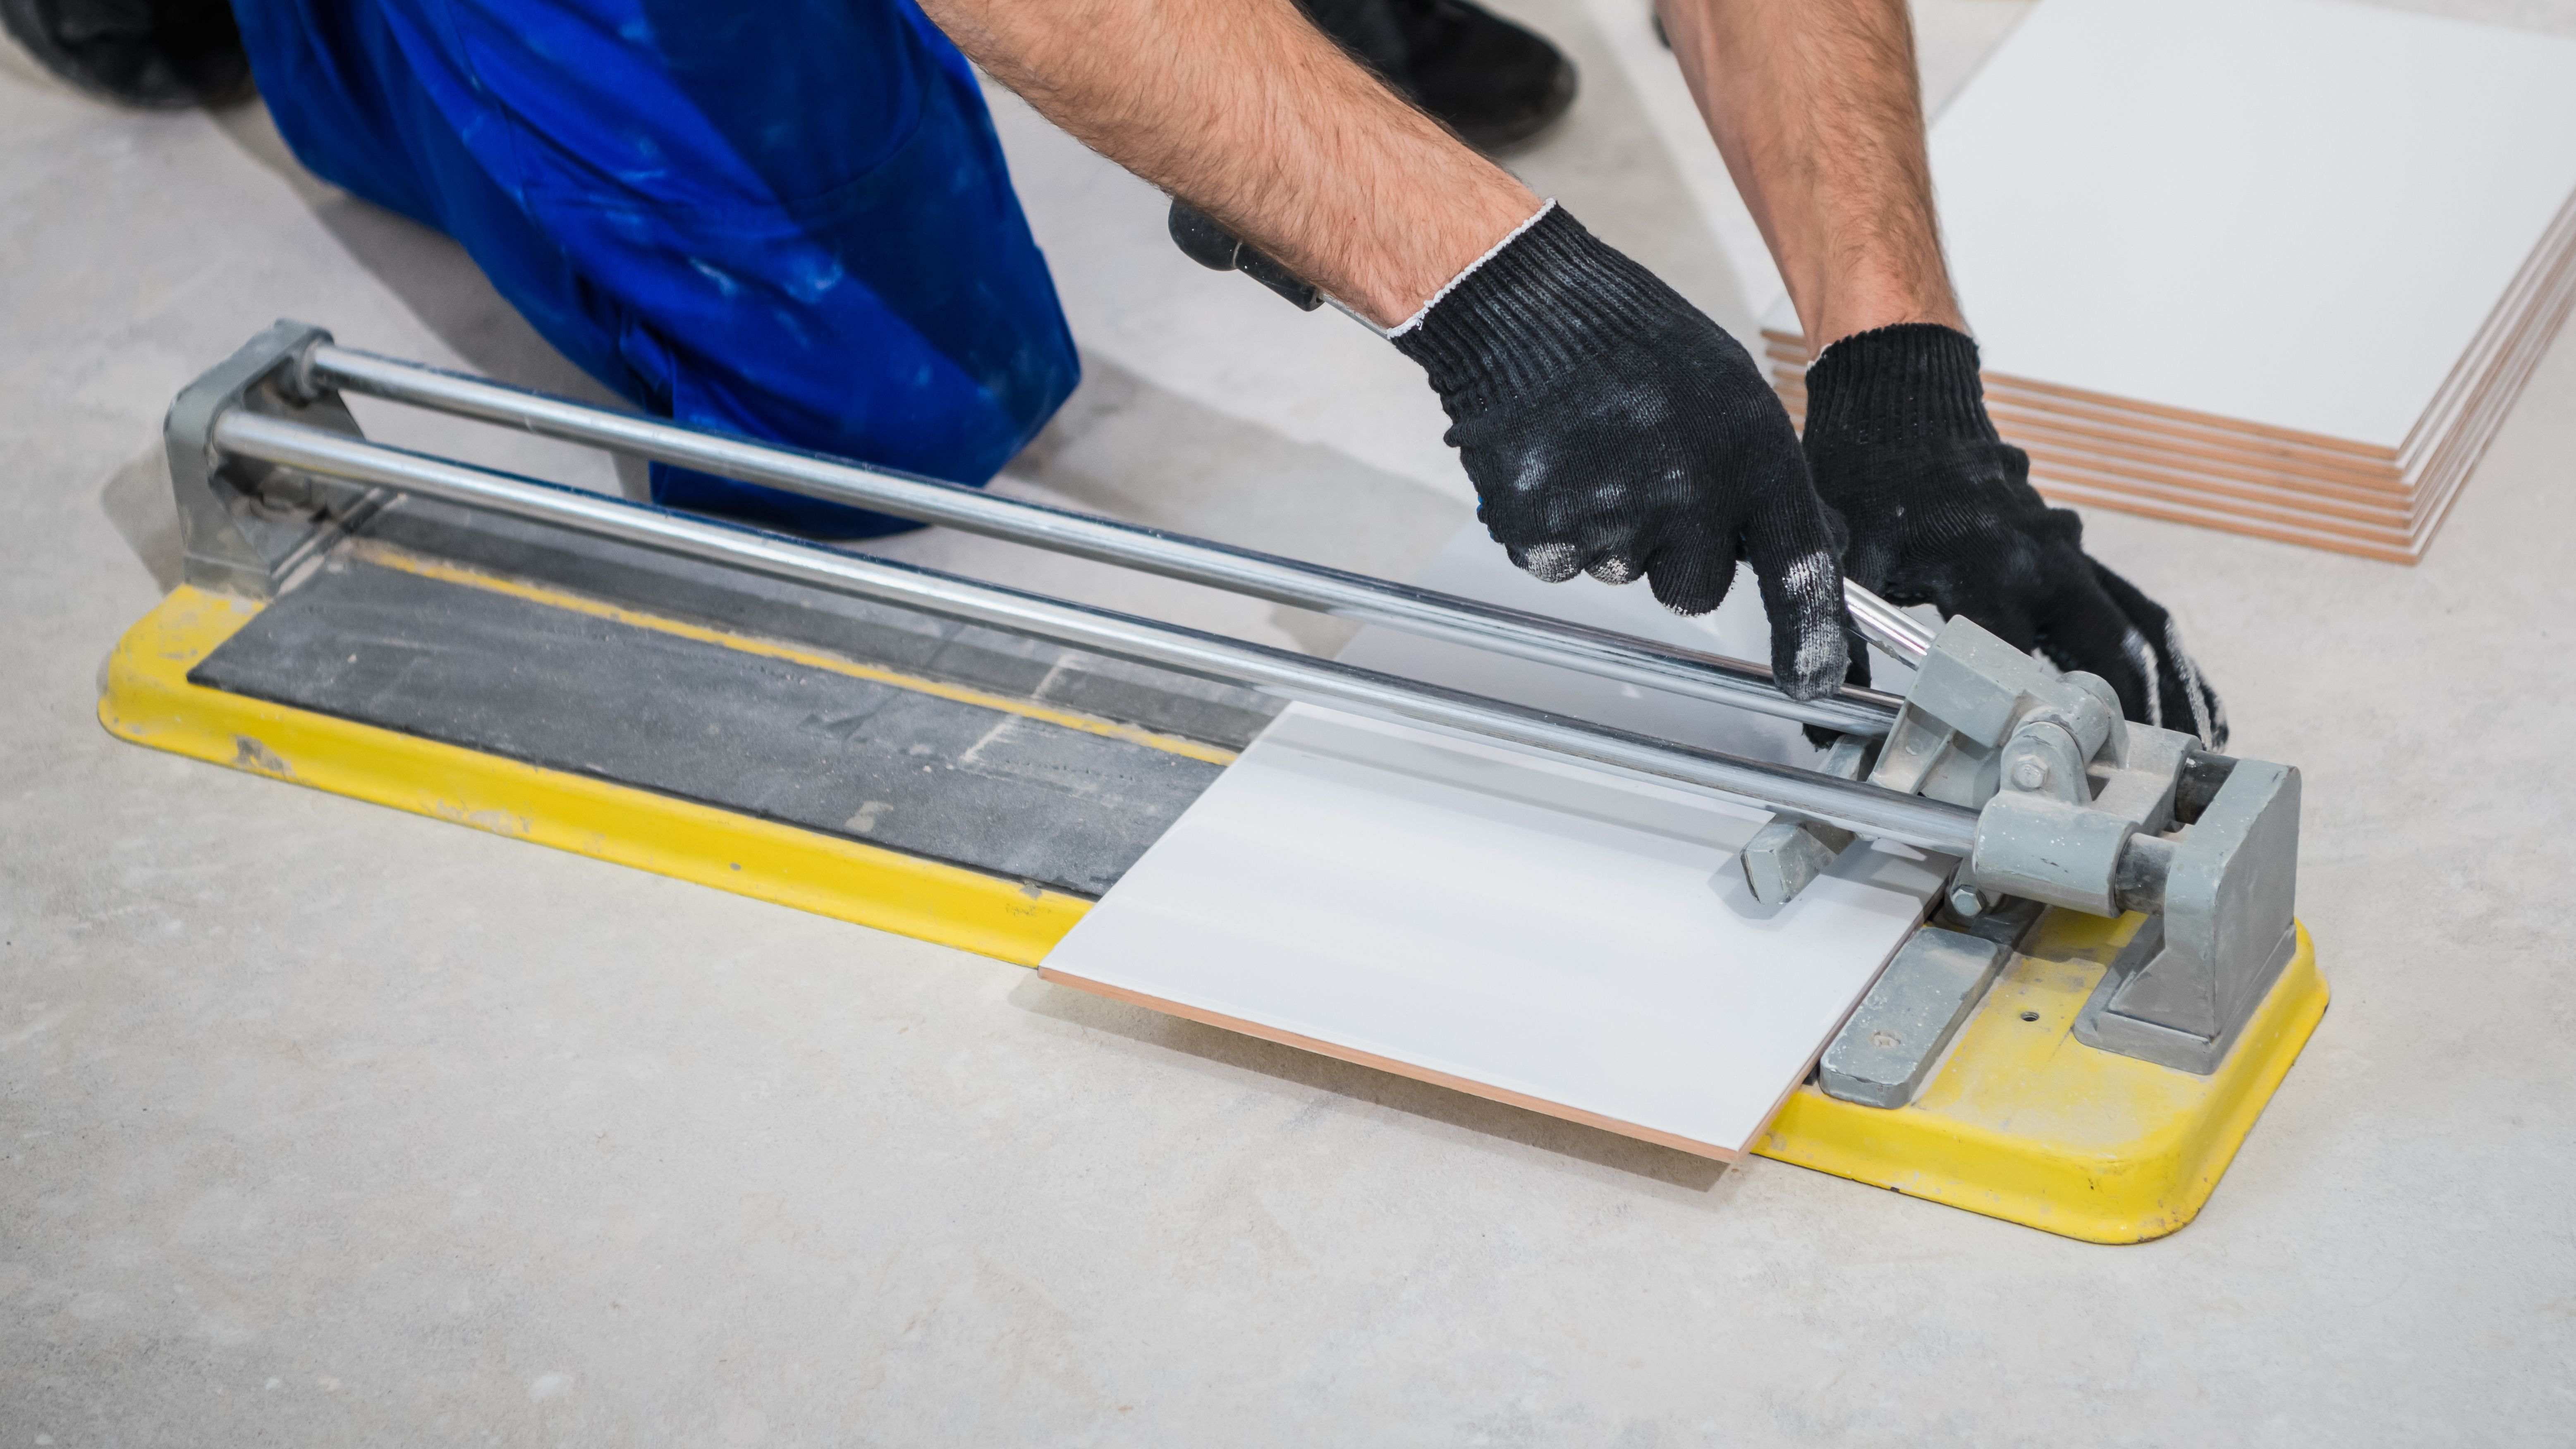 Tile cutter buying guide